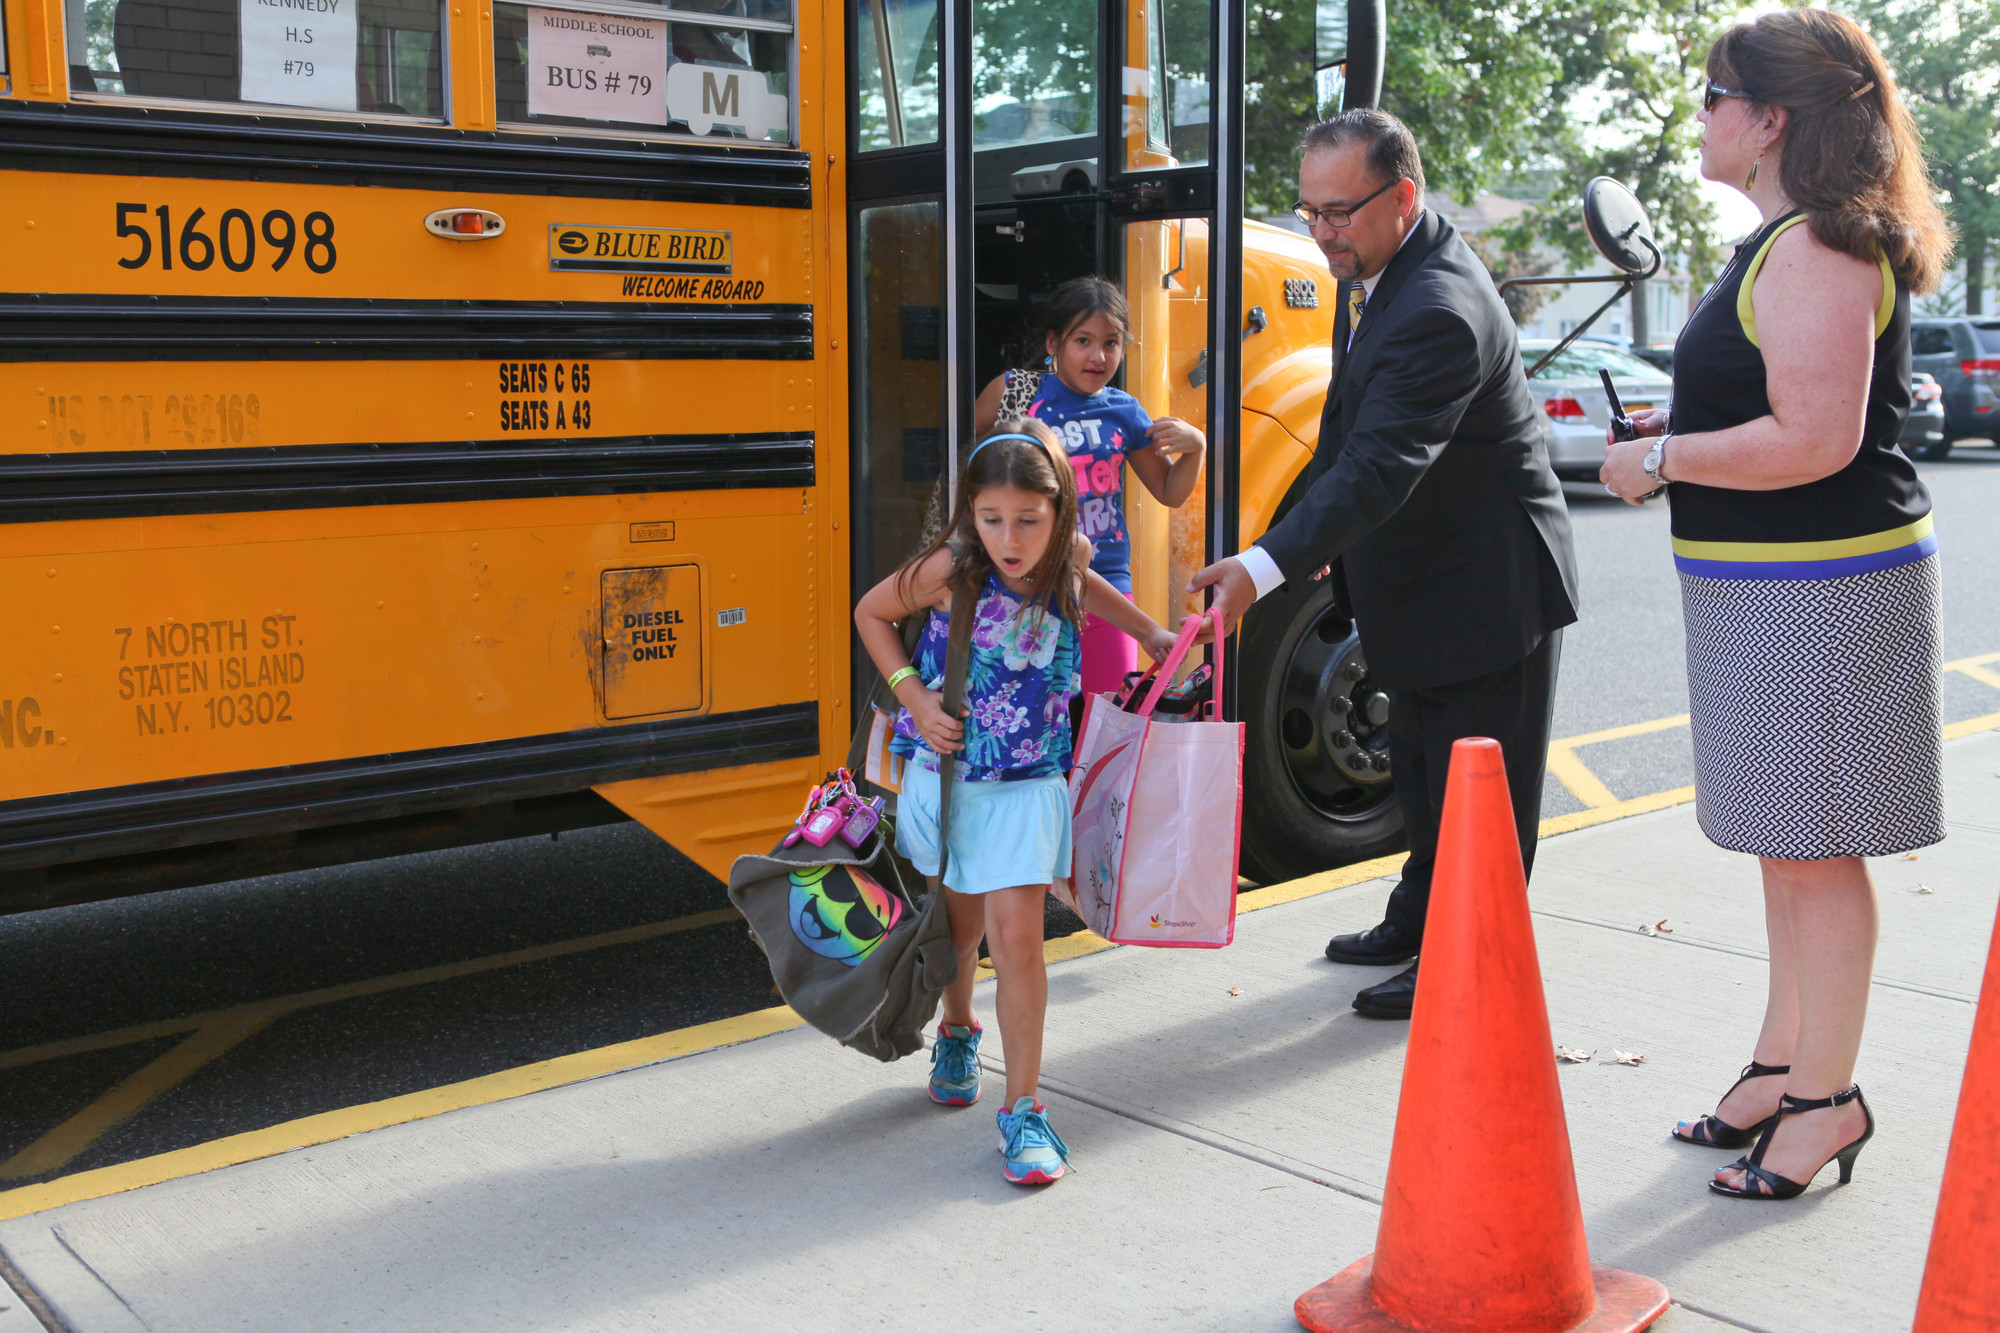 Bellmore Superintendent Dr. Joseph Famularo and Principal Patti Castine assisted children off the bus at the Reinhard center.